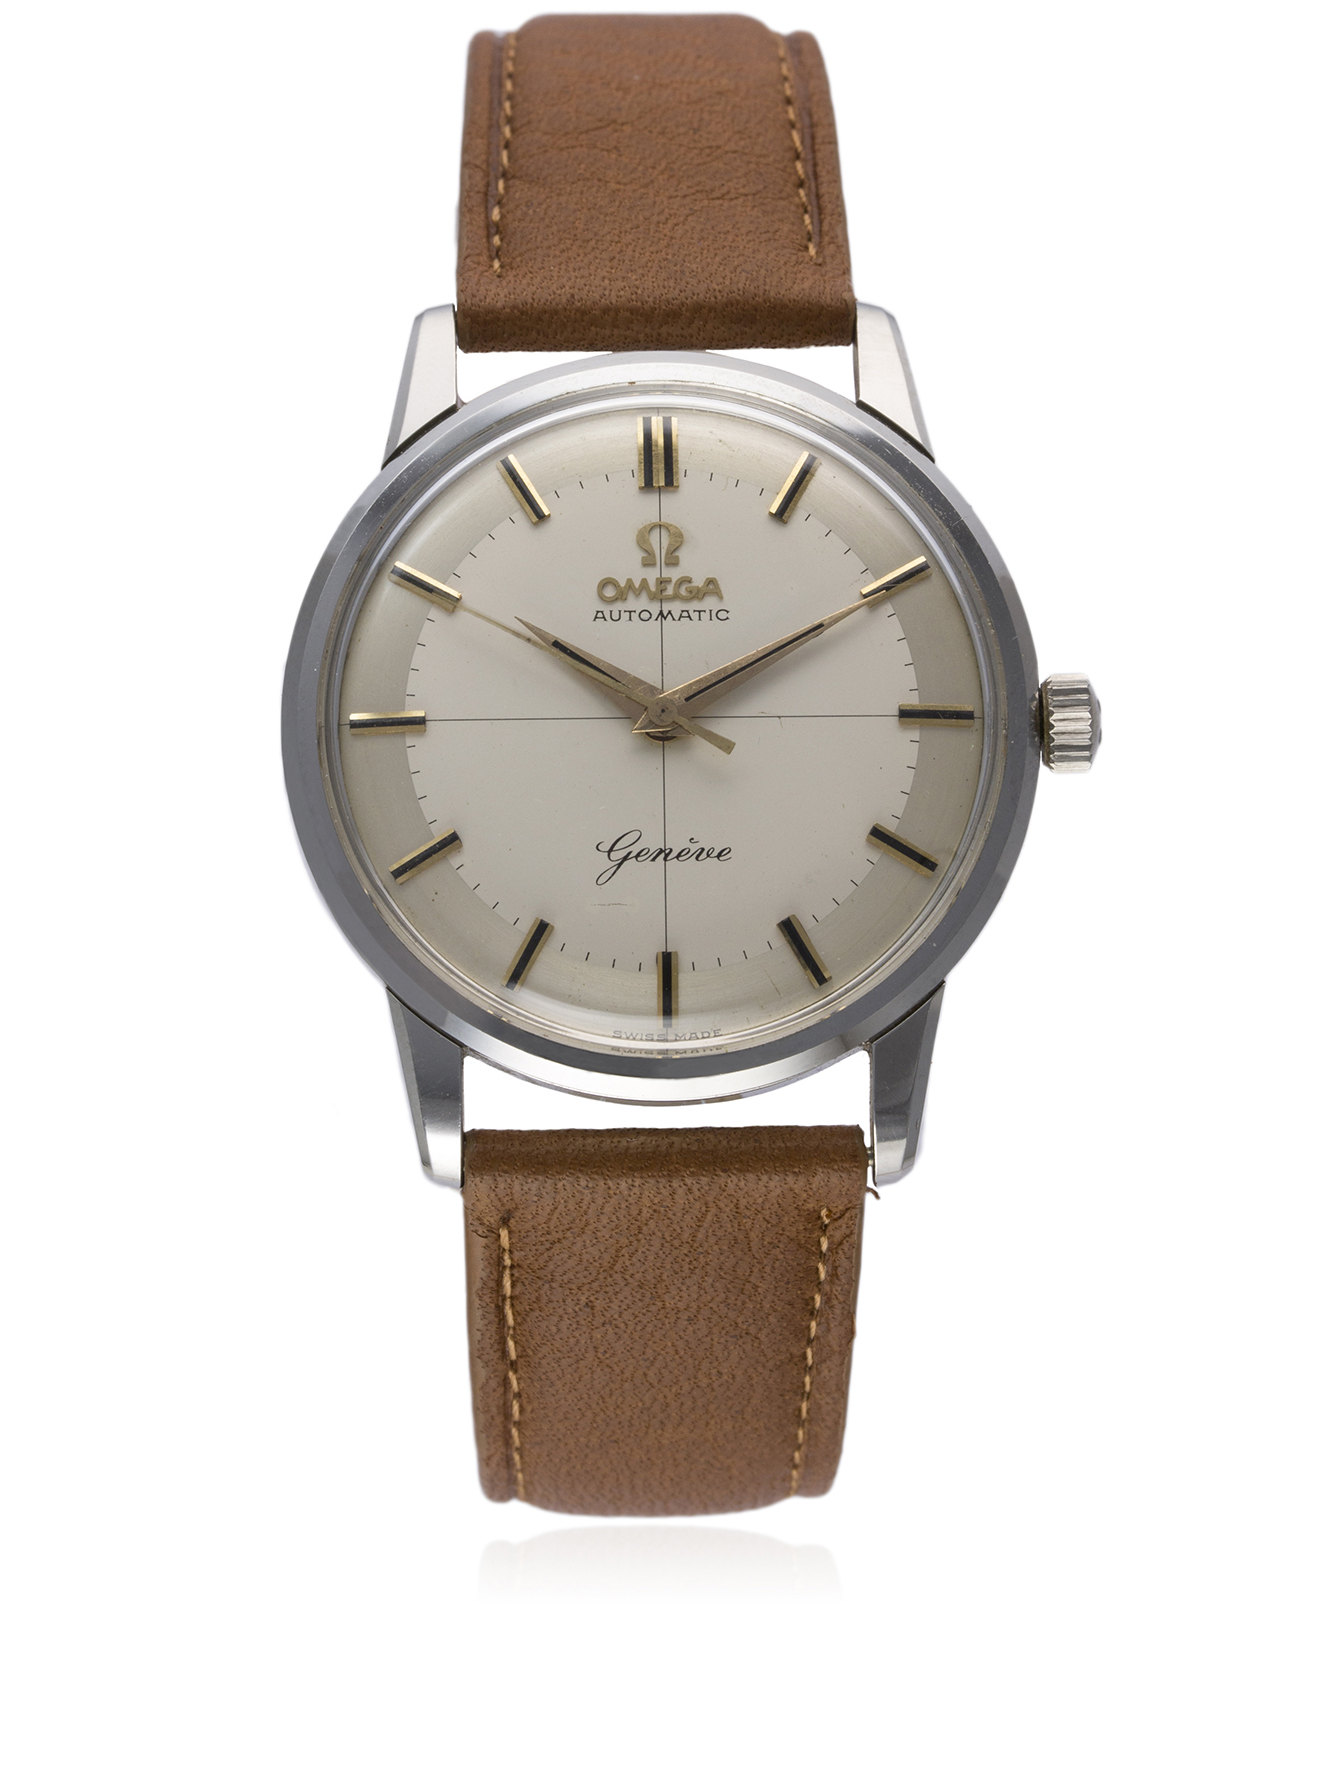 A GENTLEMAN'S STAINLESS STEEL OMEGA GENEVE AUTOMATIC WRIST WATCH CIRCA 1954, REF. 14702-3 SC  D: Two